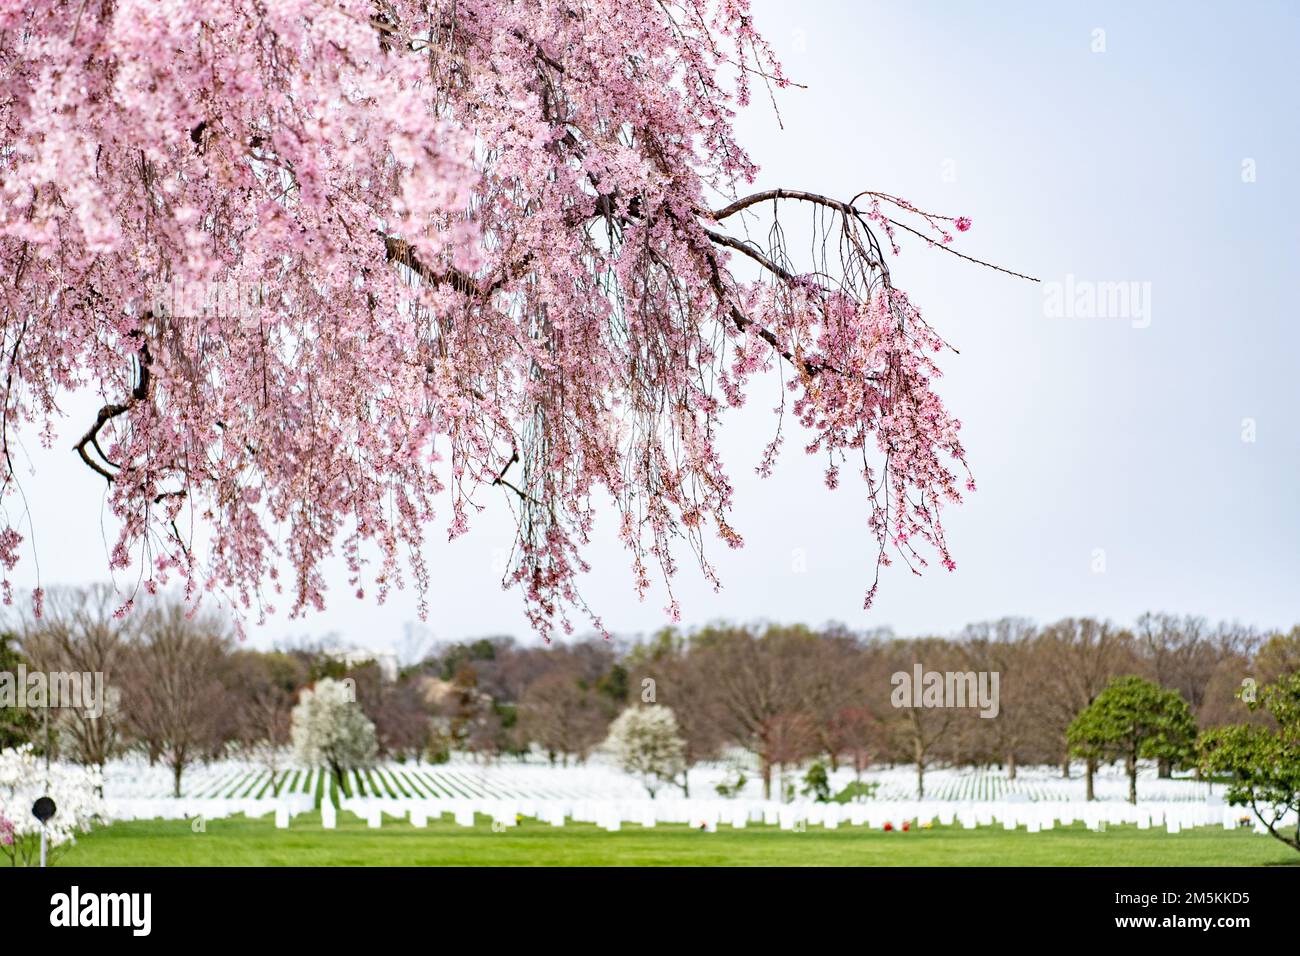 A Weeping Cherry Tree blooms outside of the Columbarium Court at Arlington Nationa Cemetery, Arlington, Va., March 22, 2022. Stock Photo